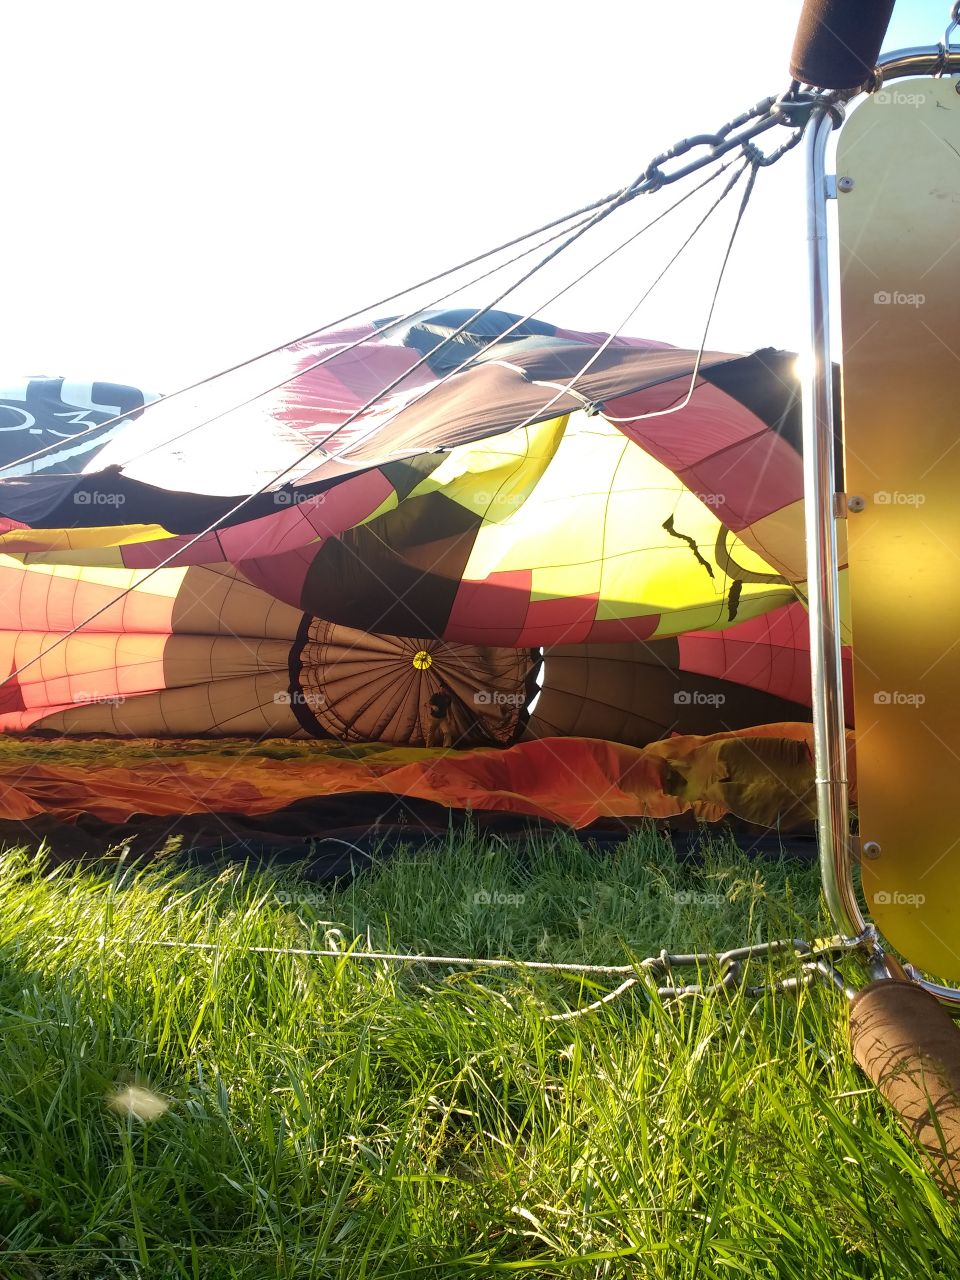 Inflating a colorful hot air balloon